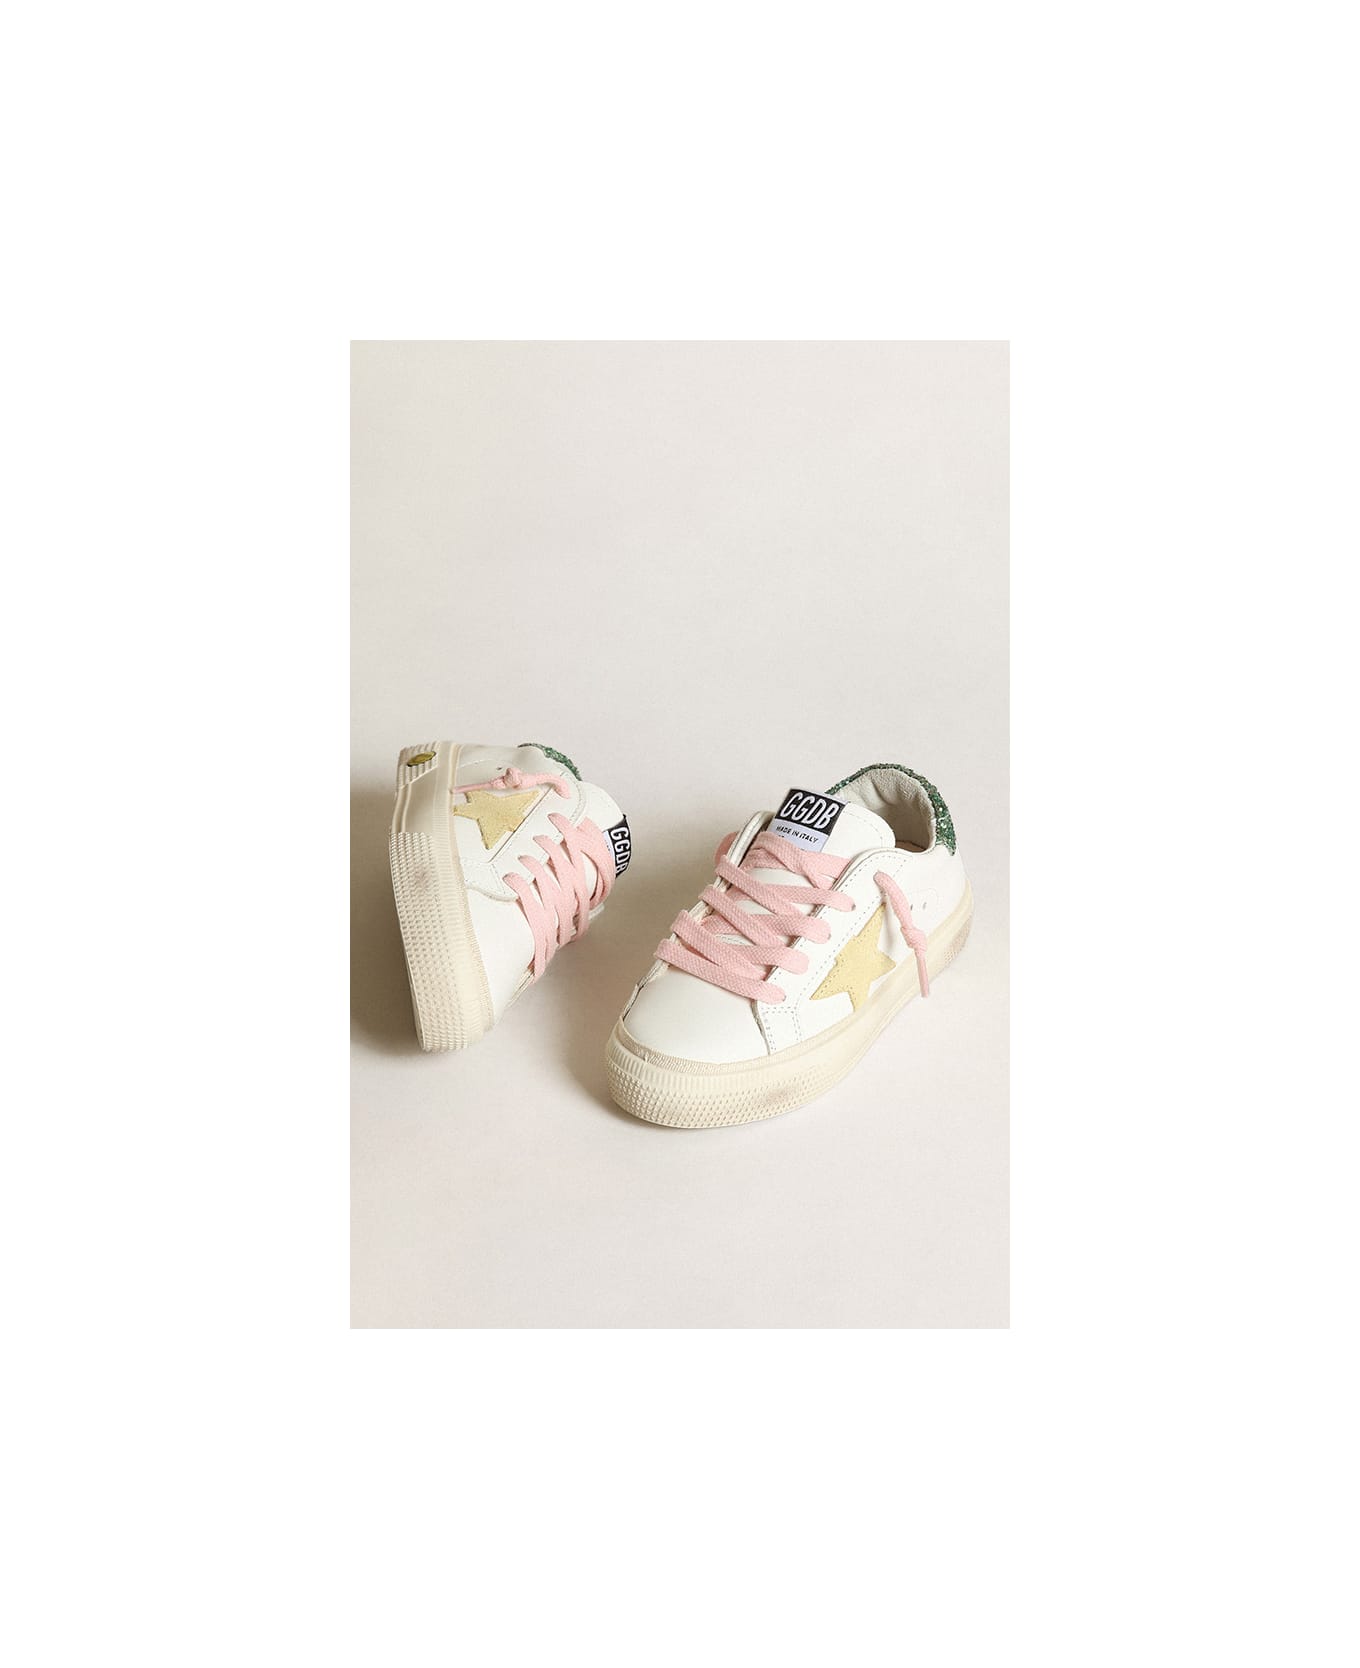 Golden Goose Sneakers May - White Ligh Yellow Green